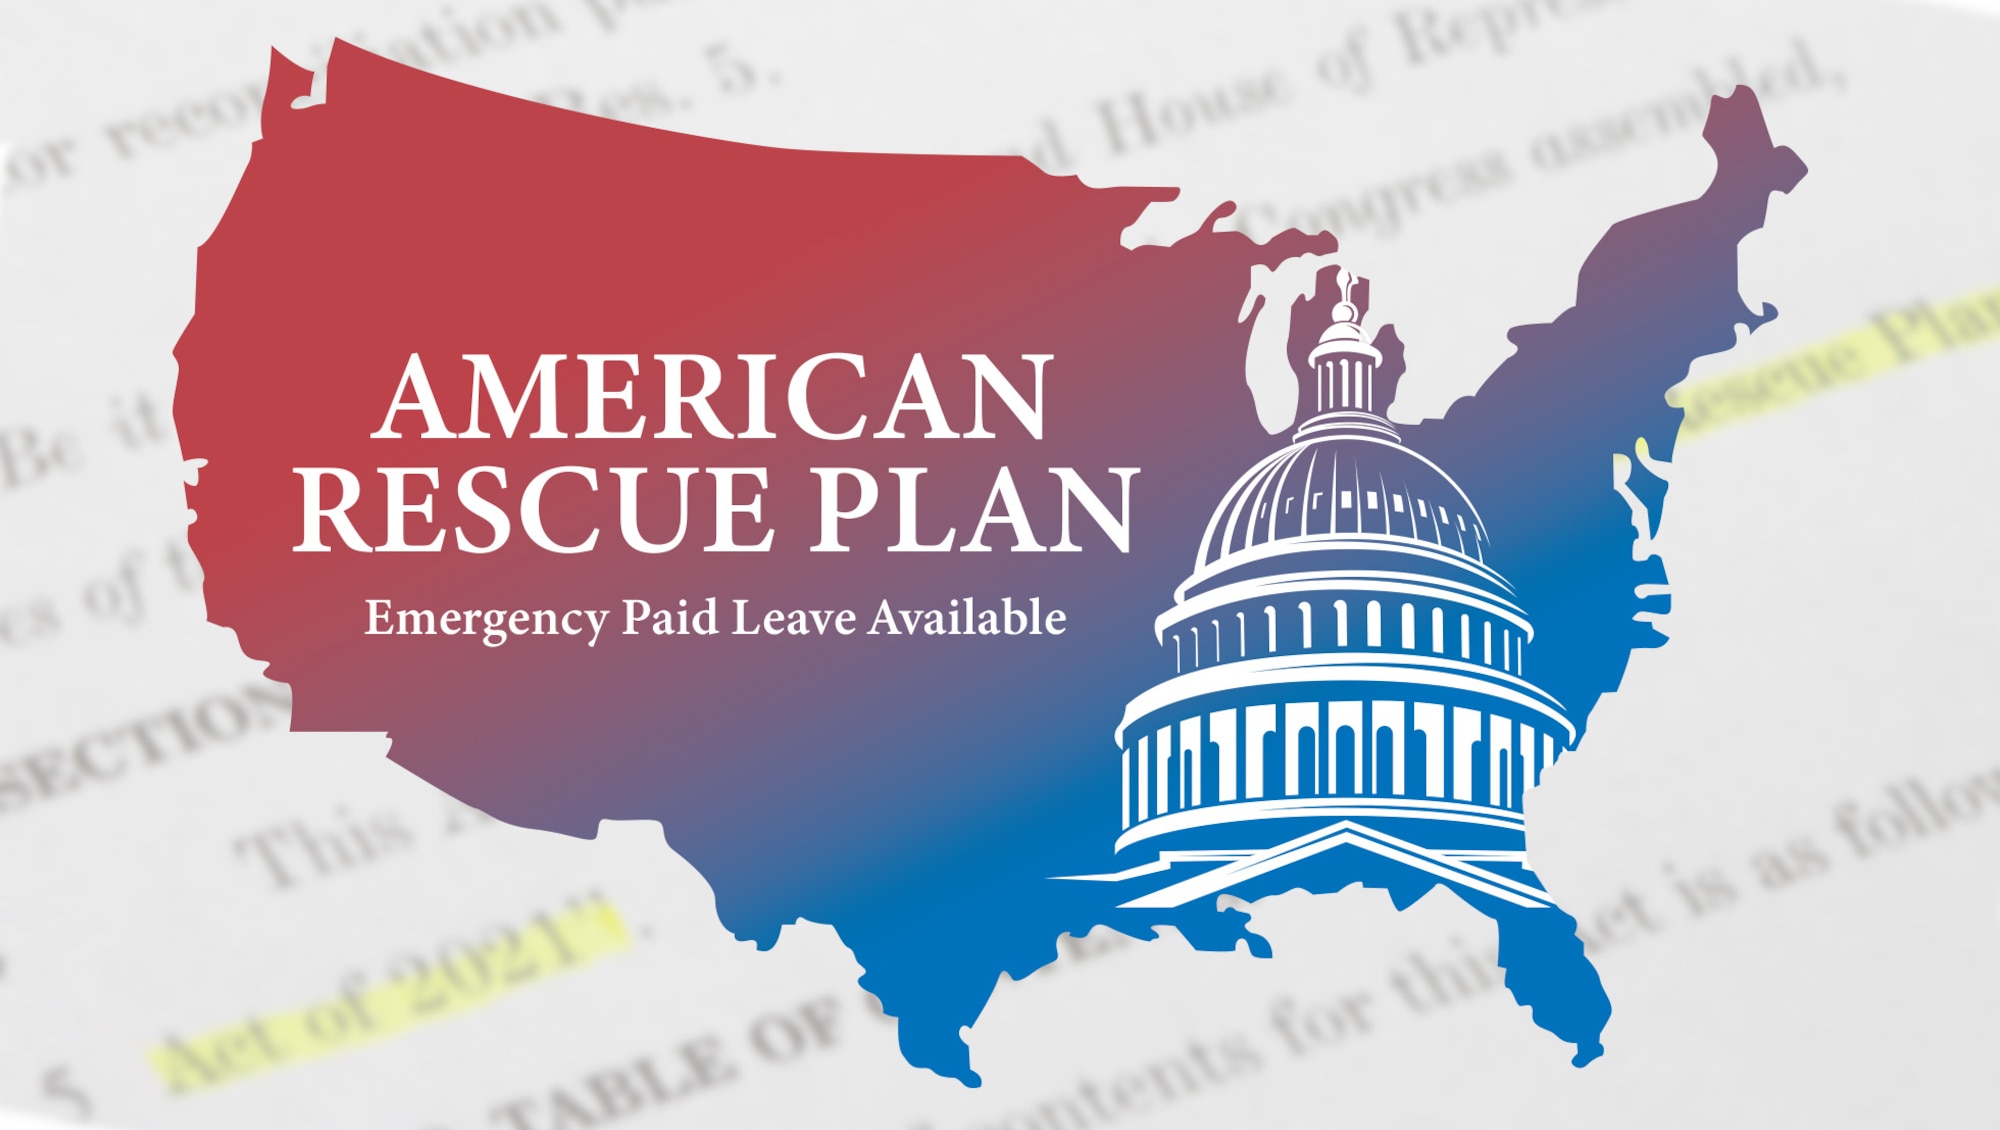 The words American Rescue Plan, Emergency Paid Leave Available" over the top of a silhouette of the United States and U.S. Capitol Building.